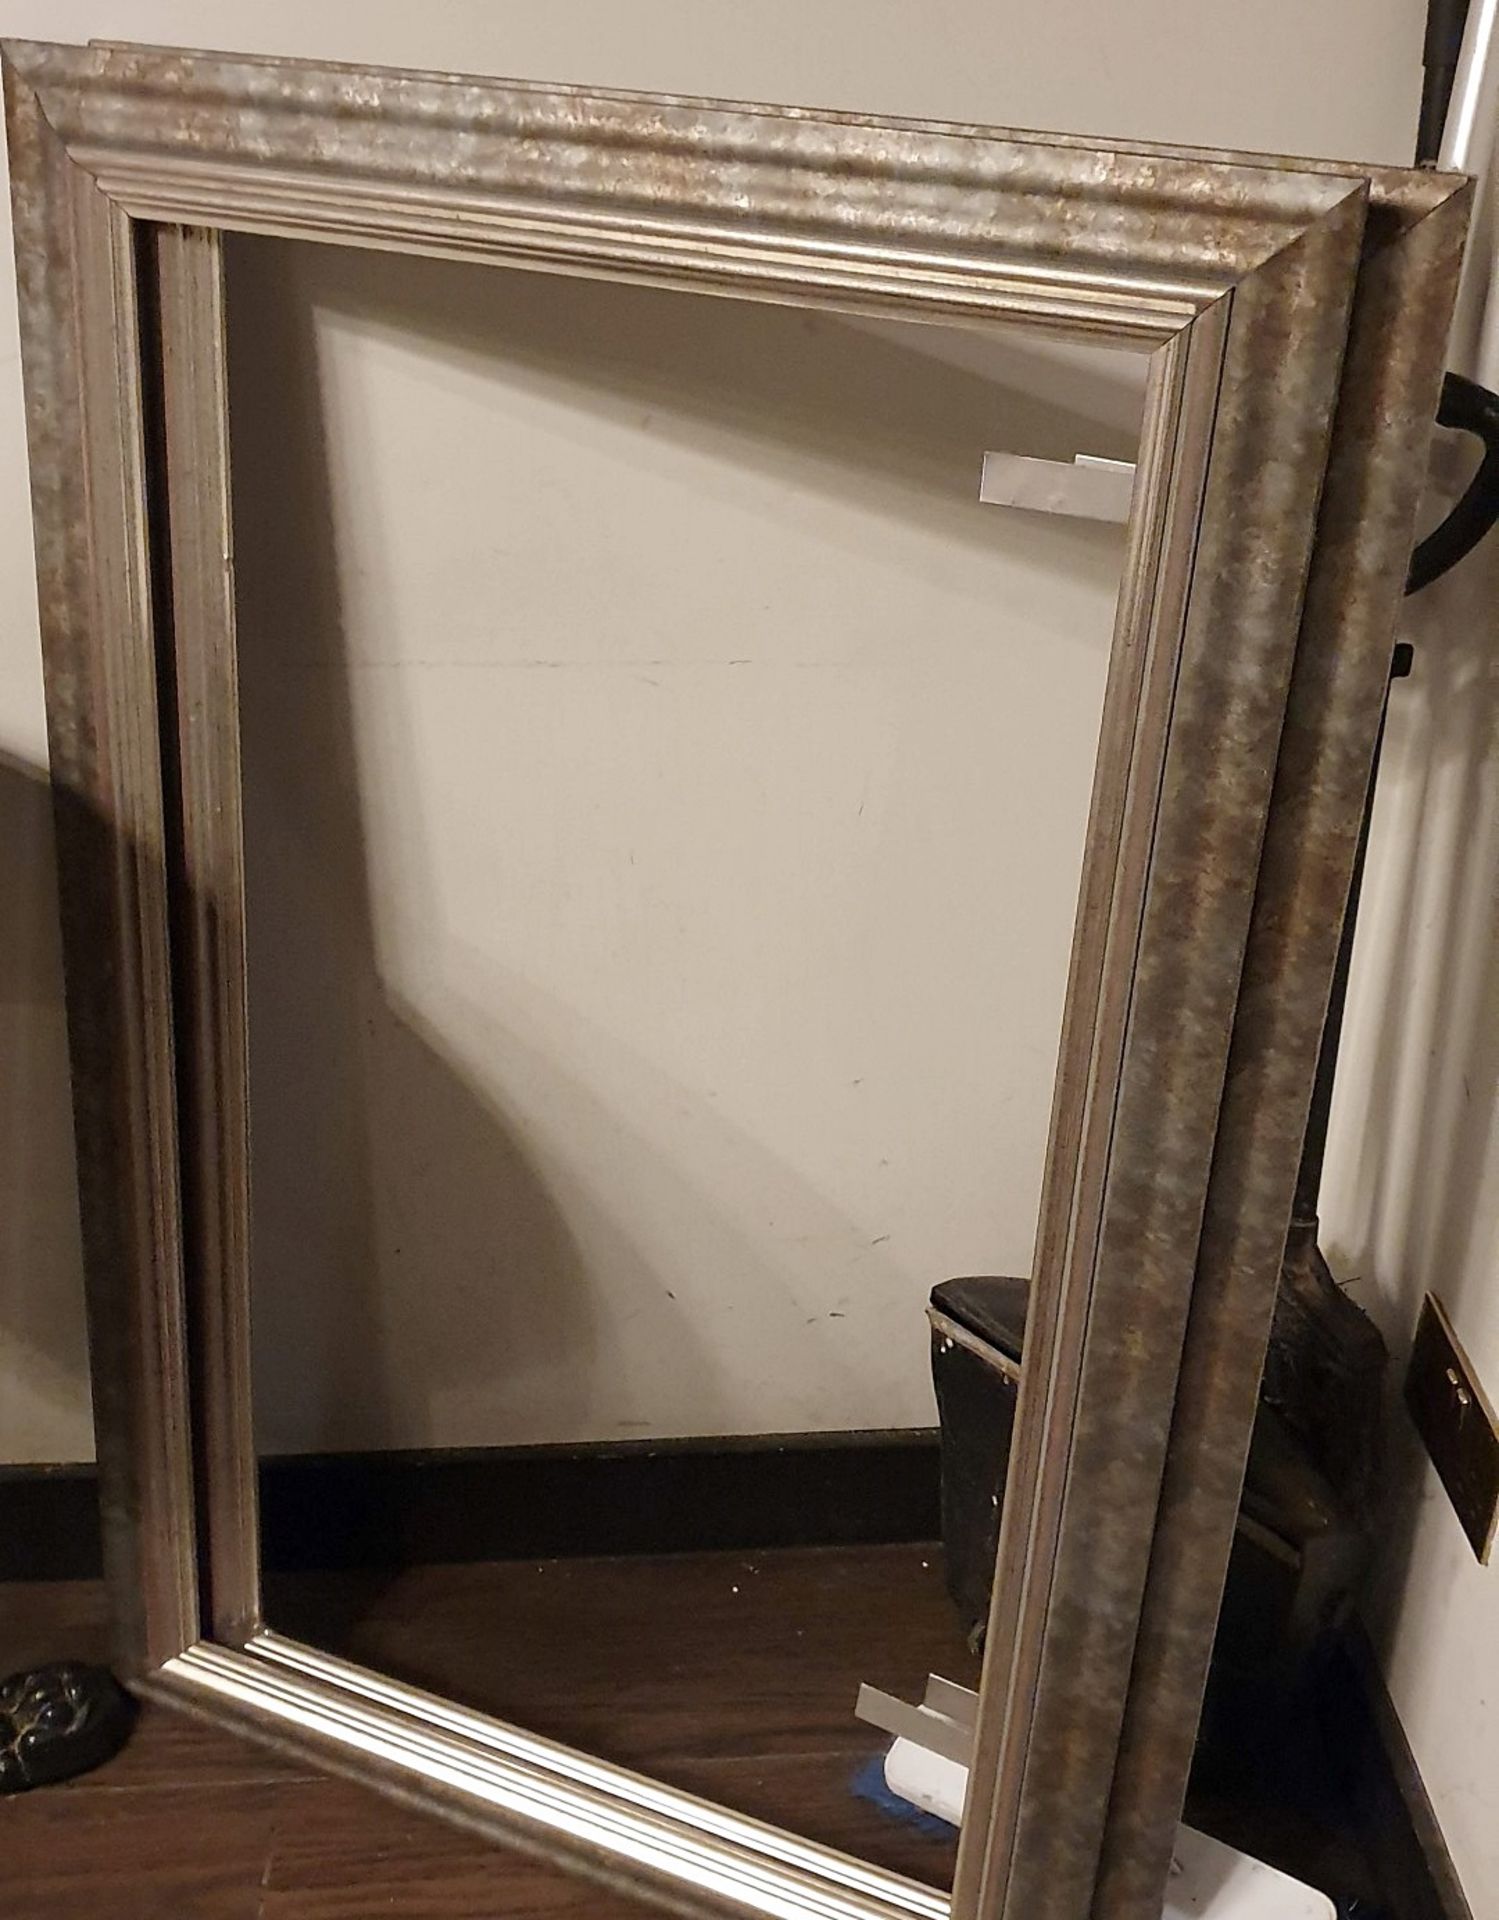 1 x Reproduction Bakers Advert and Two Picture Frames - 109 x 76 cms / 109 x 70 cms - Ref PA152 - - Image 2 of 2